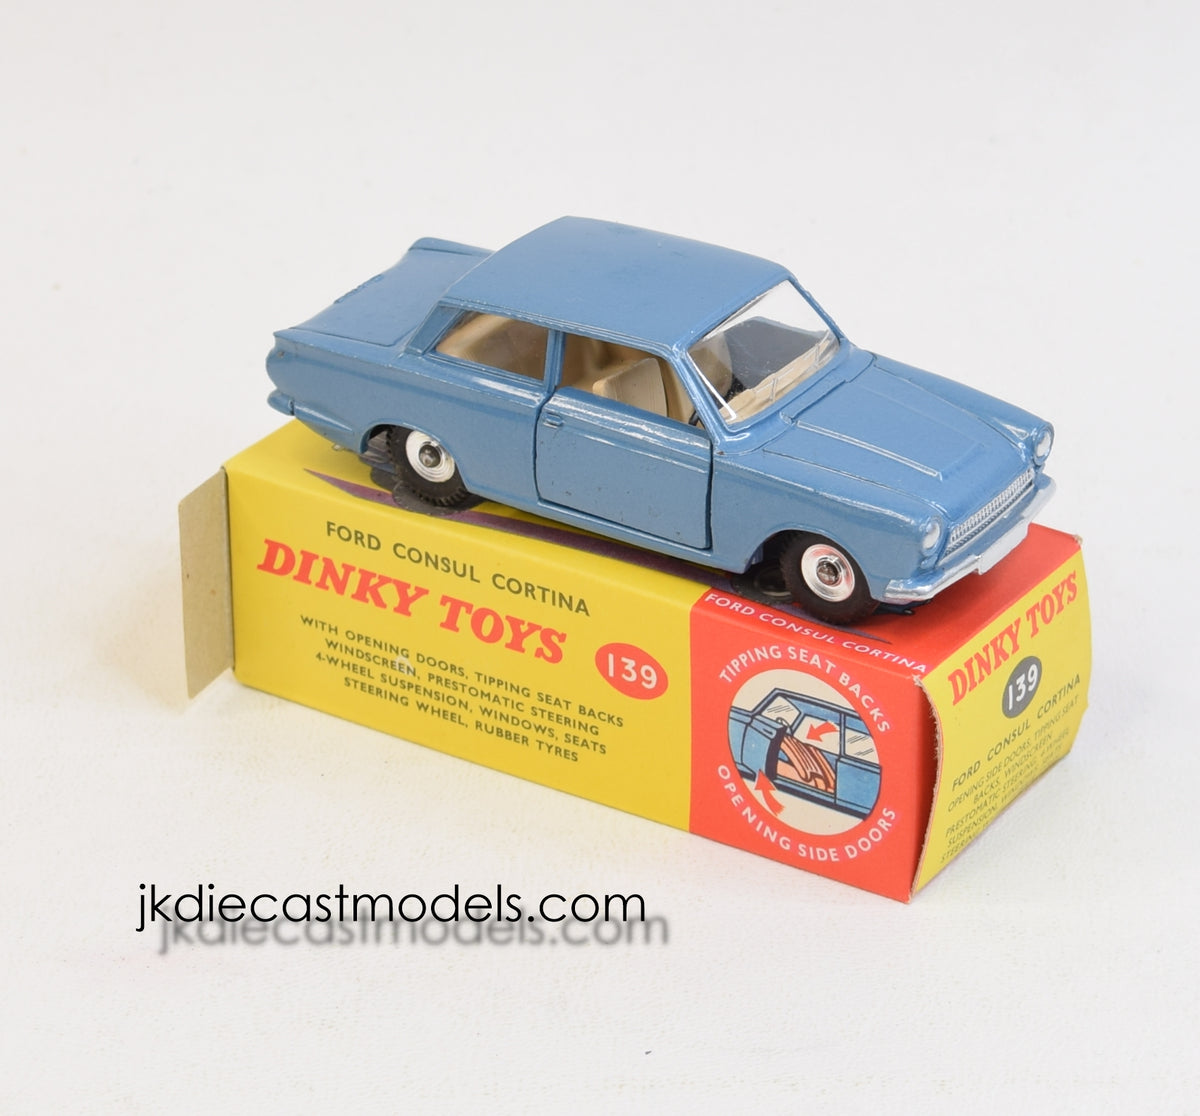 Dinky toys 139 Ford Consul Virtually Mint/Lovely box (No.5)